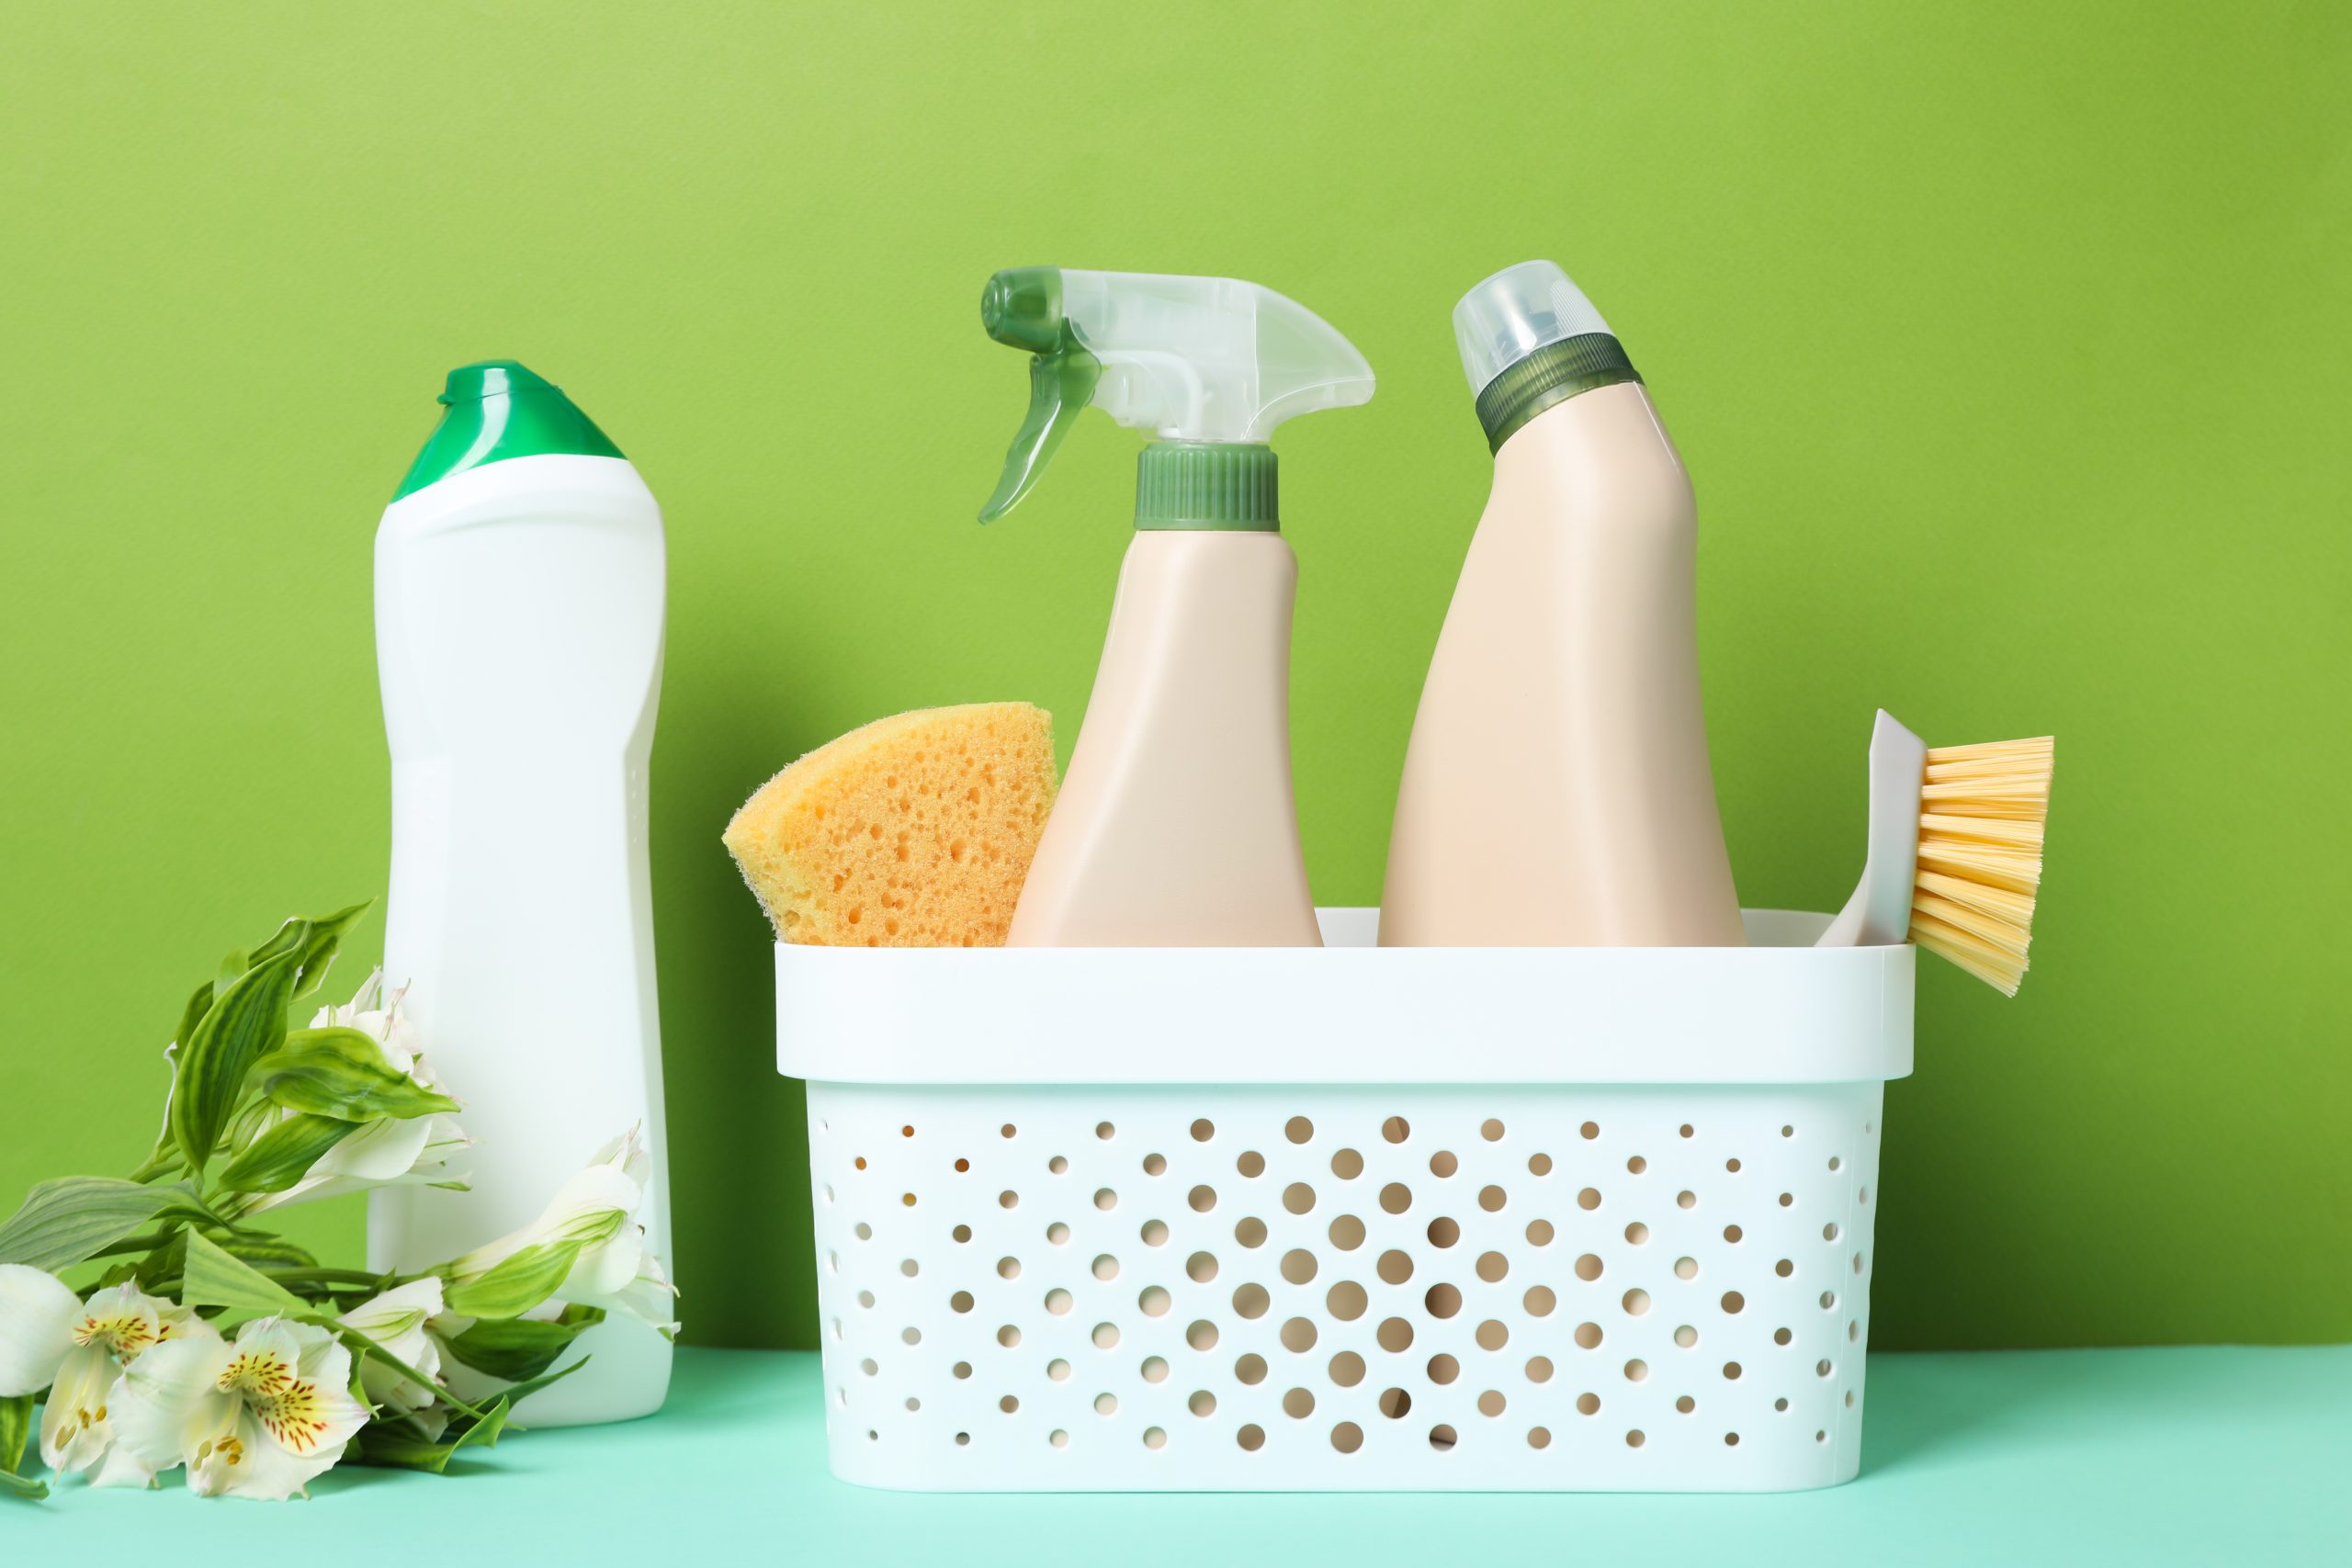 5 ways to choose eco-friendly cleaning supplies